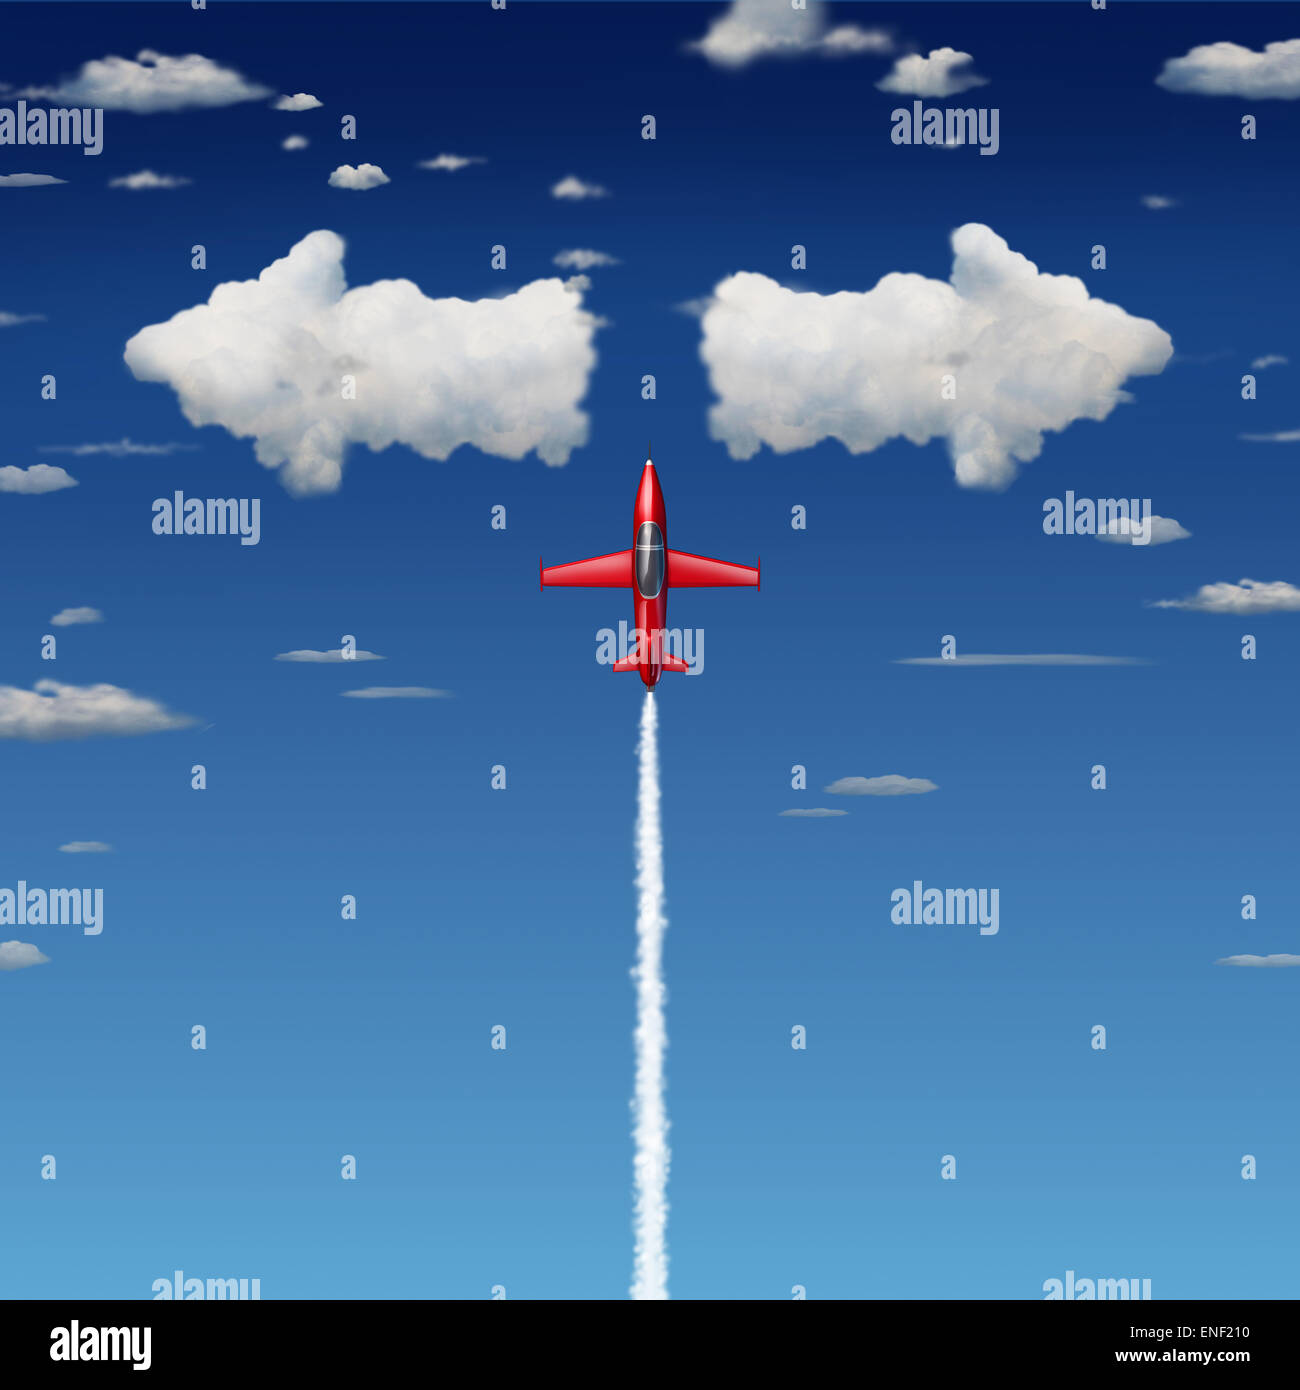 Decision making business concept as an acrobatic jet airplane flying up towards clouds shaped as arrows pointint in opposite directions as a metaphor for making quick difficult decisions. Stock Photo